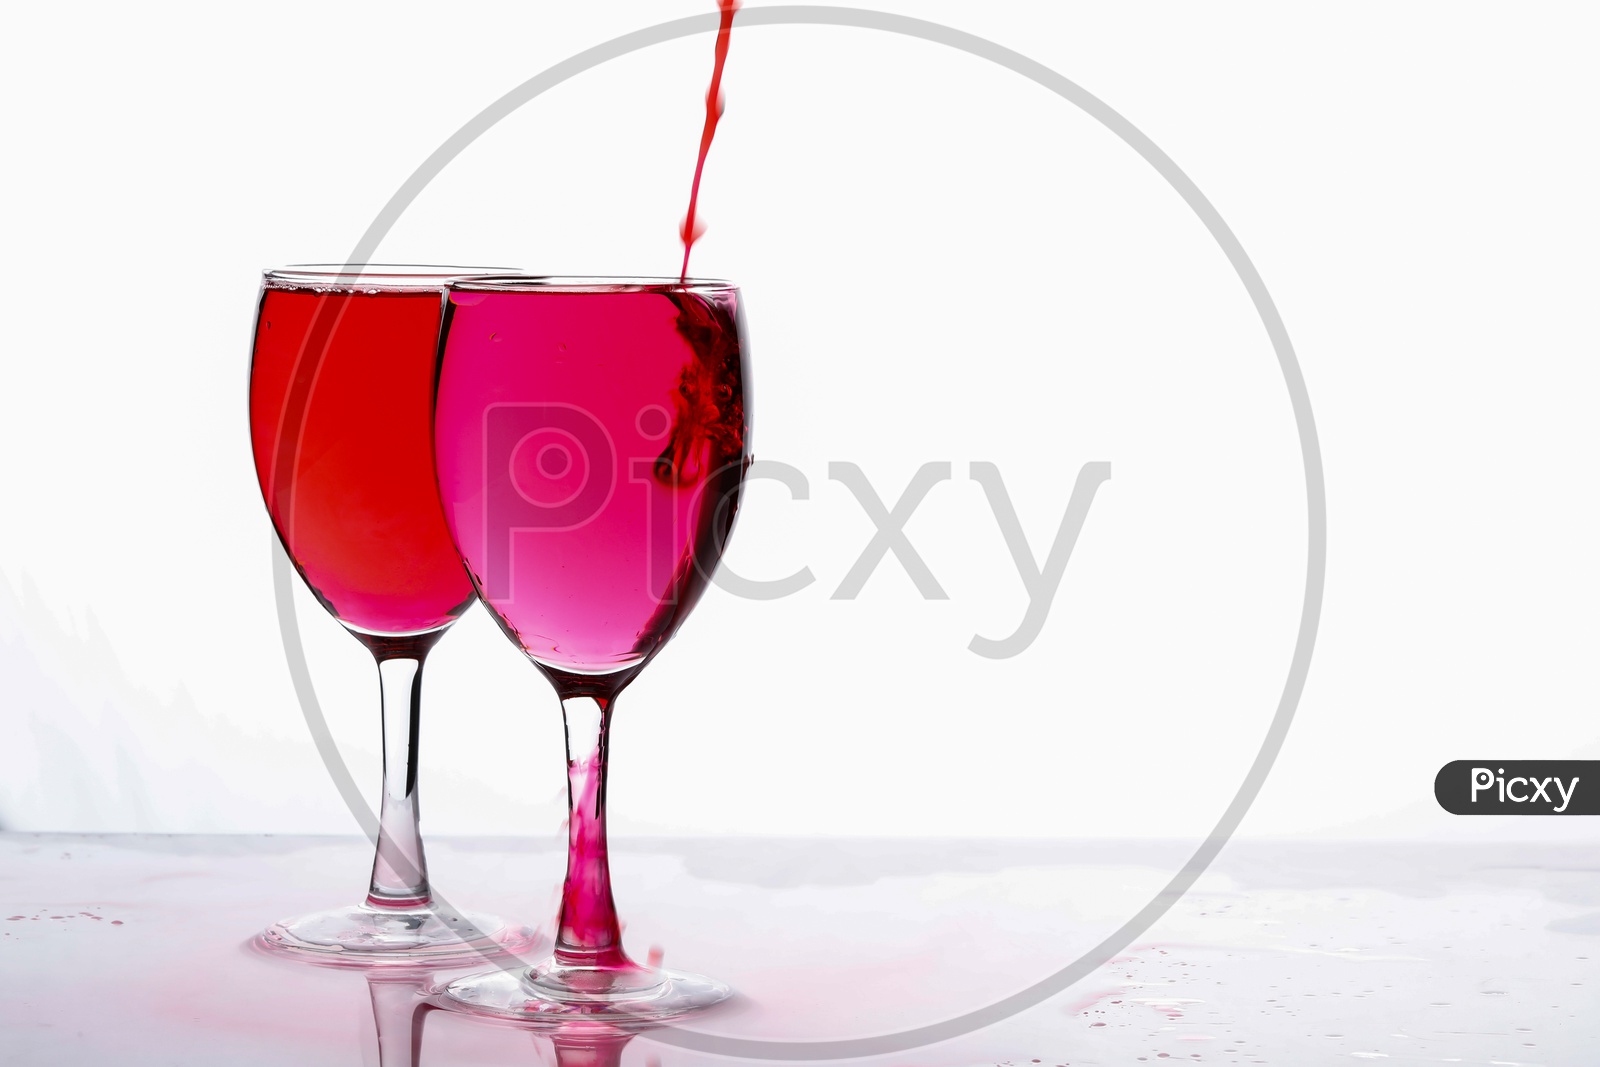 Red Food Colouring Diffuse In water in a Wine Glass On an Isolated White Background